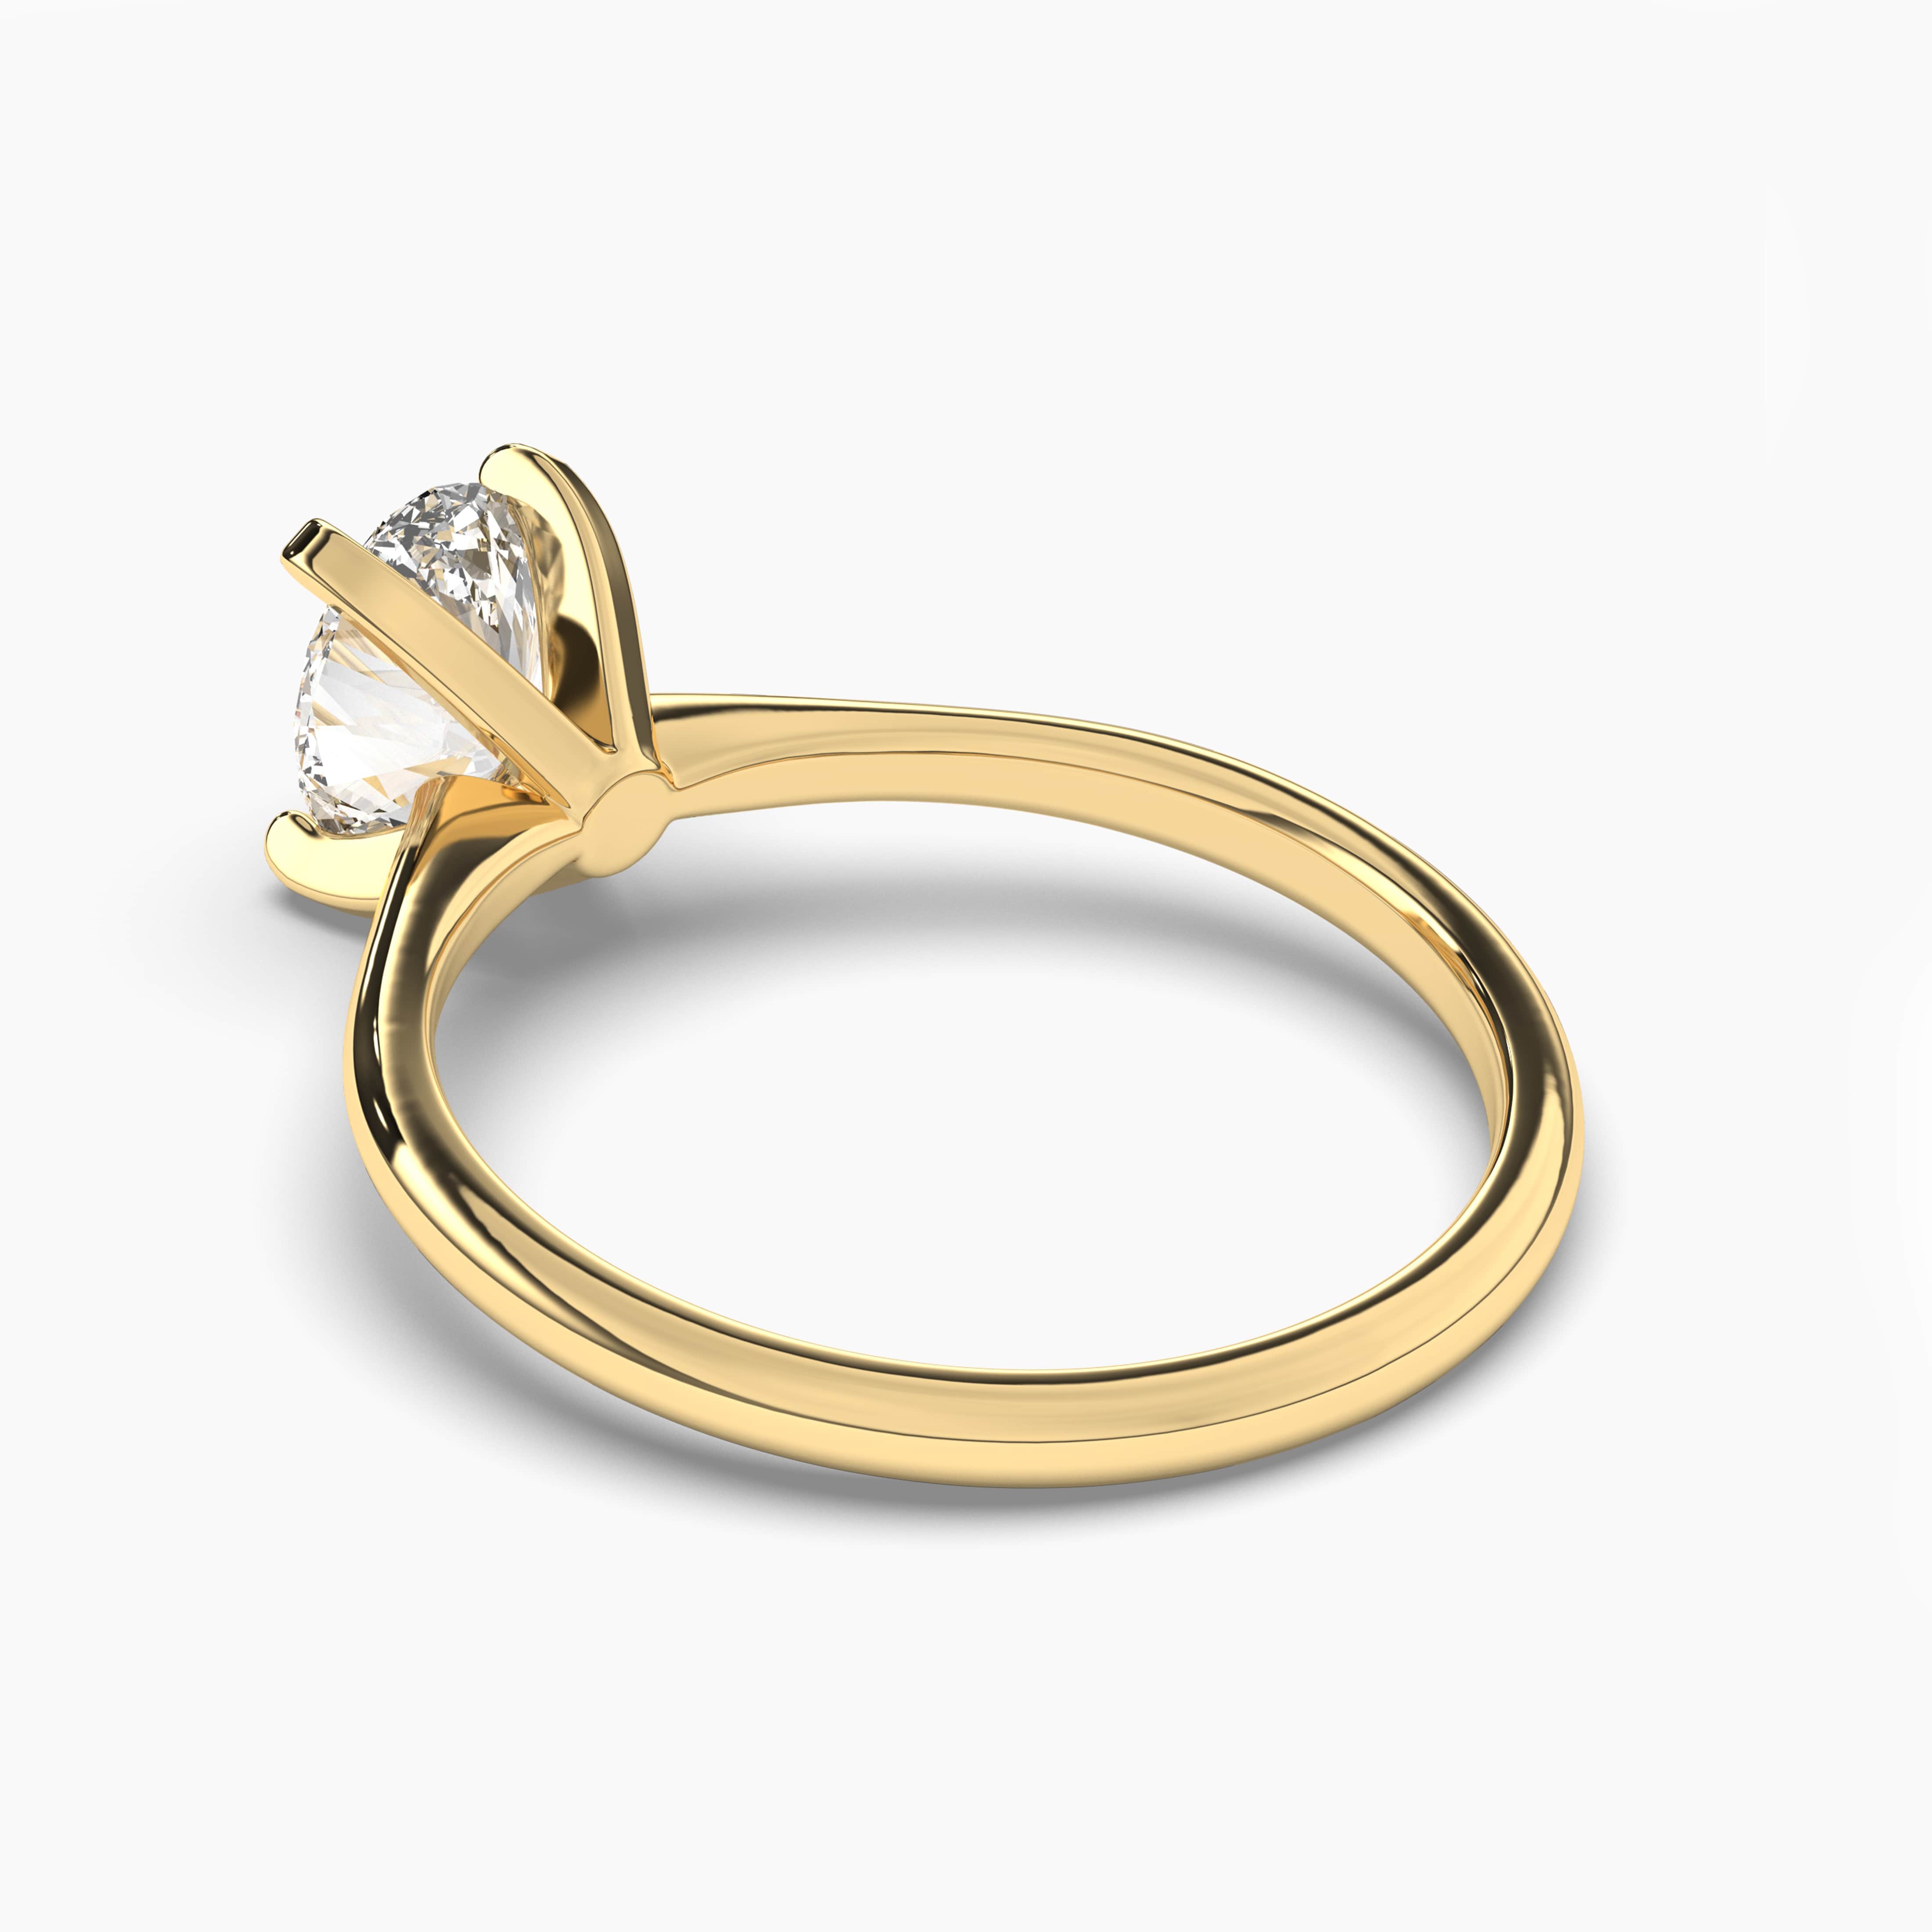 Oval diamond solitaire engagement ring set in yellow gold